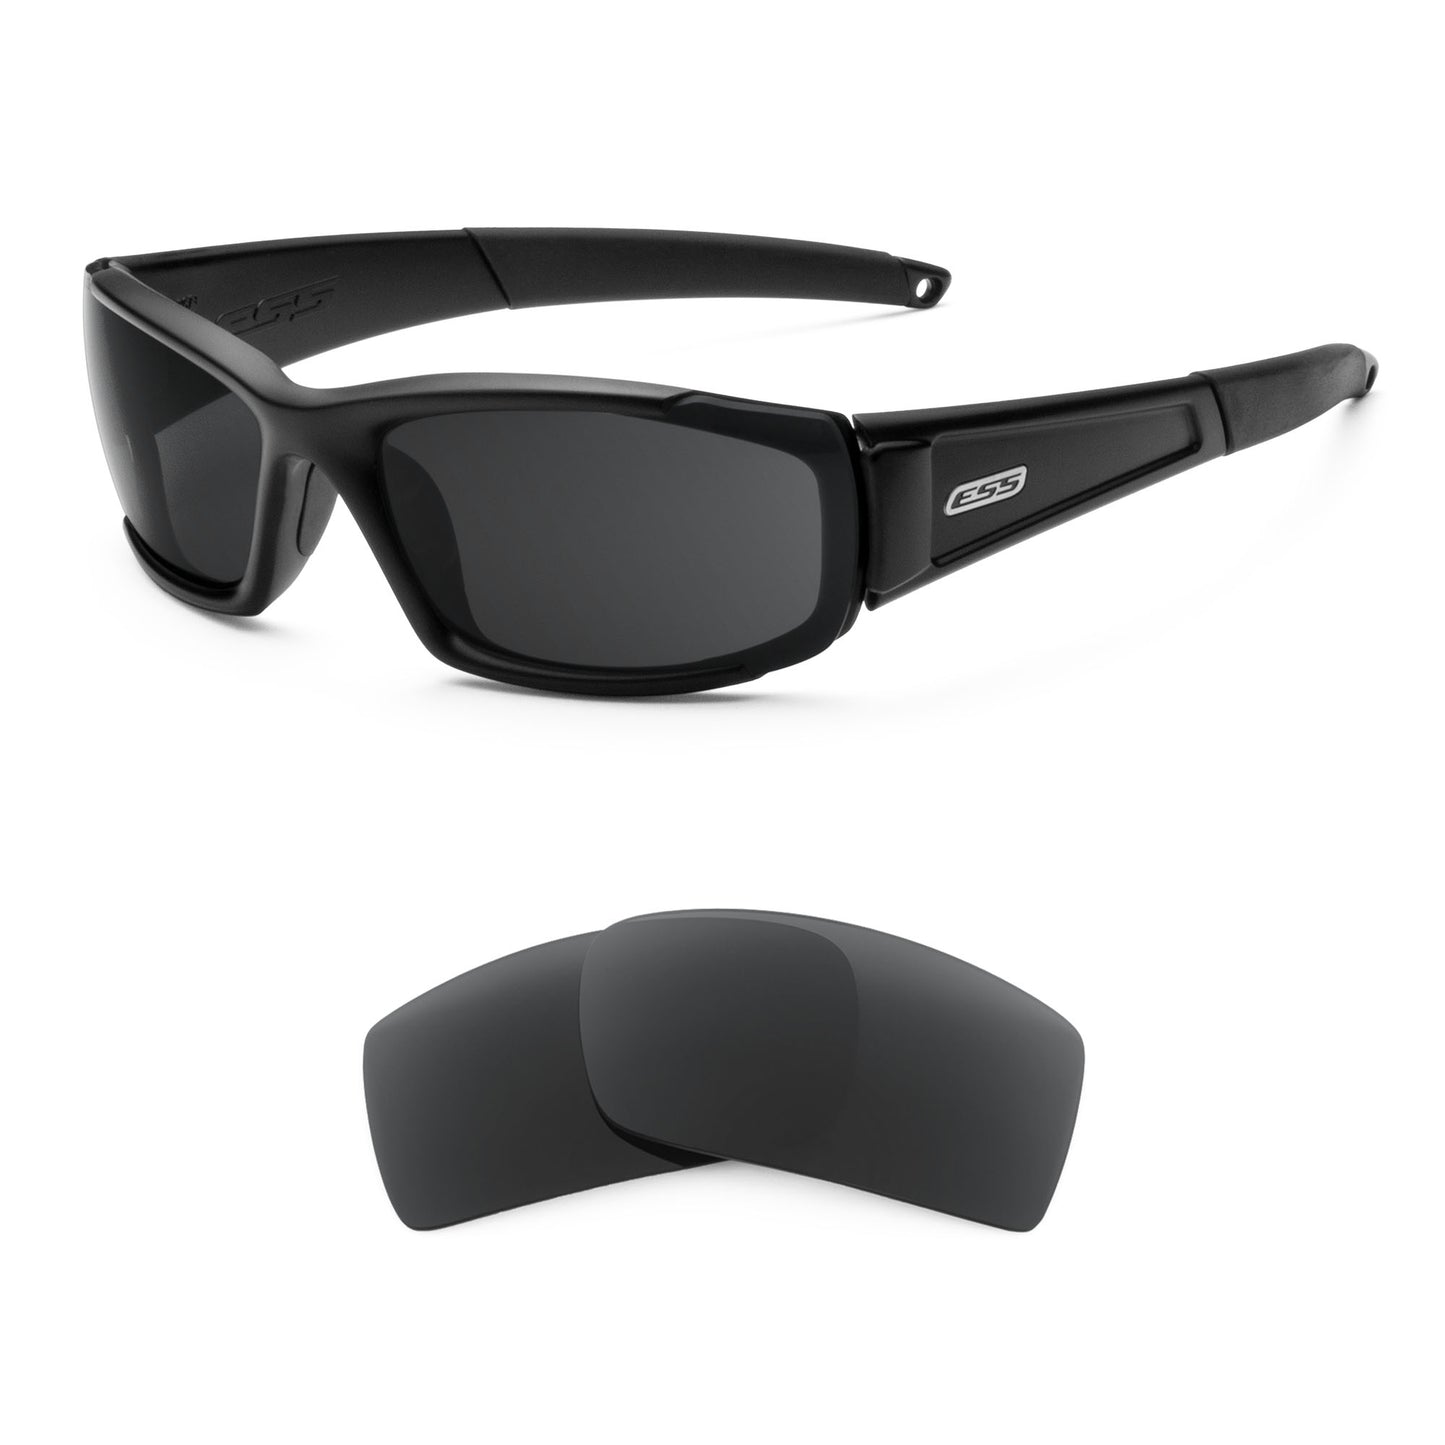 Ess CDI sunglasses with replacement lenses